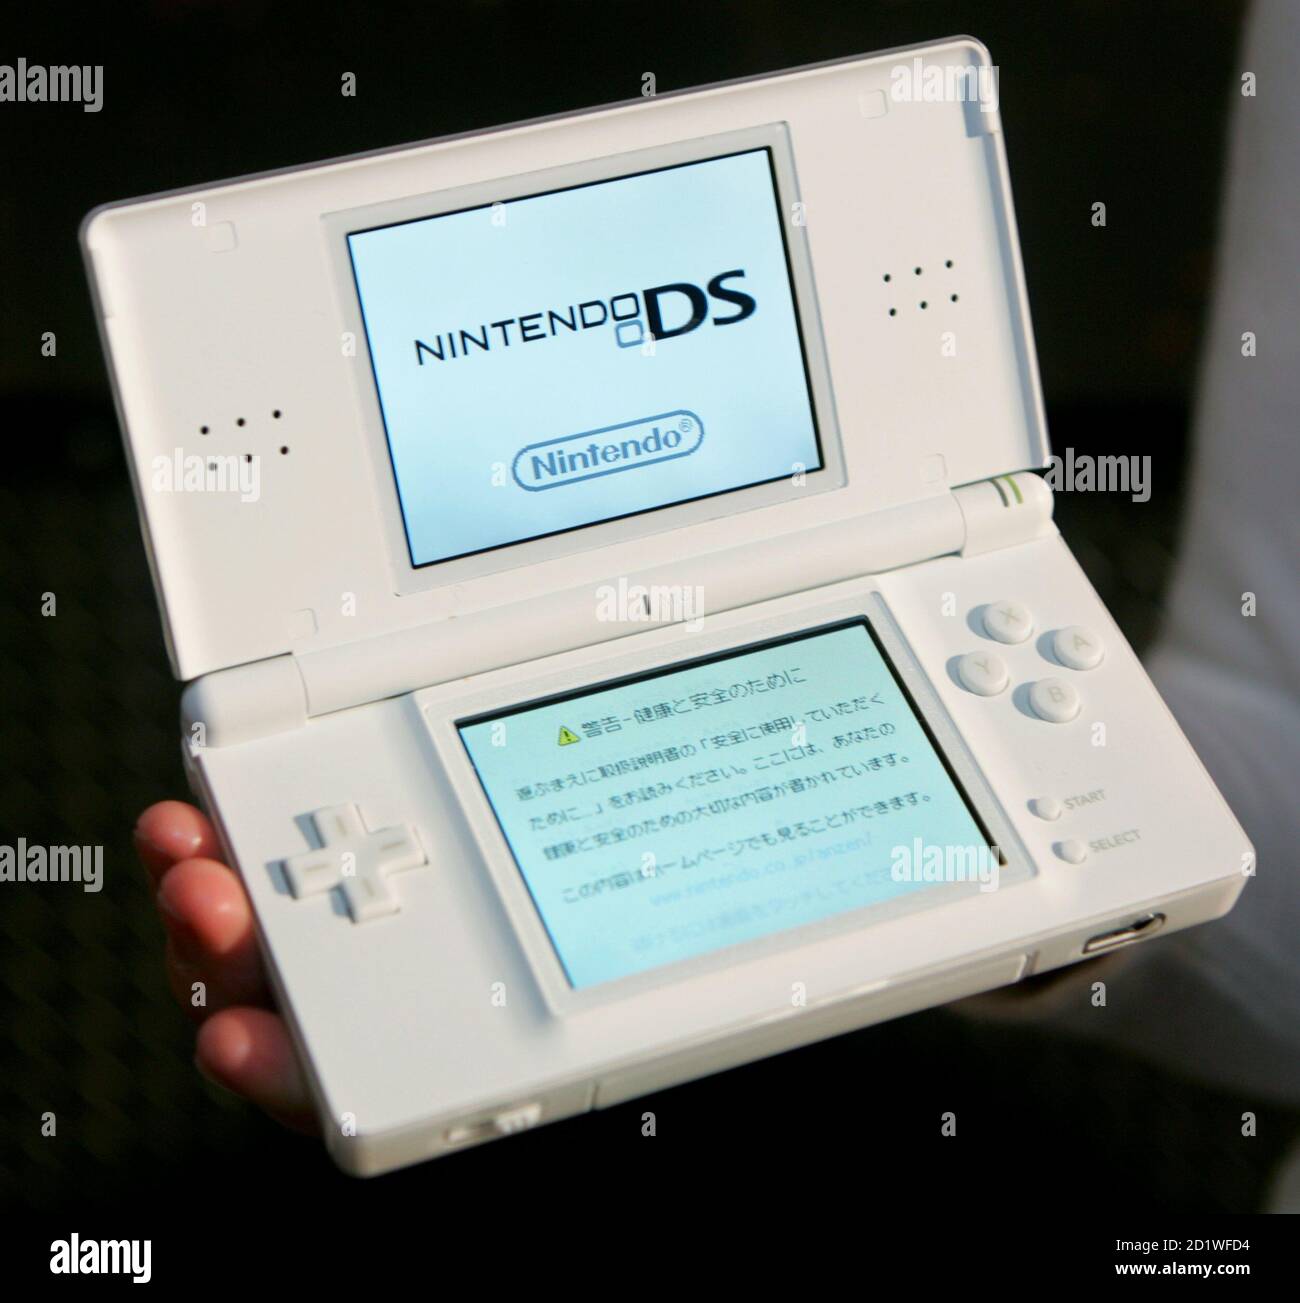 Nintendo Co. unveils its new dual screen handled video game console  "Nintendo DS Lite" in Tokyo February 15, 2006. The 218-gram (7.69-ounce)  game console will start sales on March 2, for the